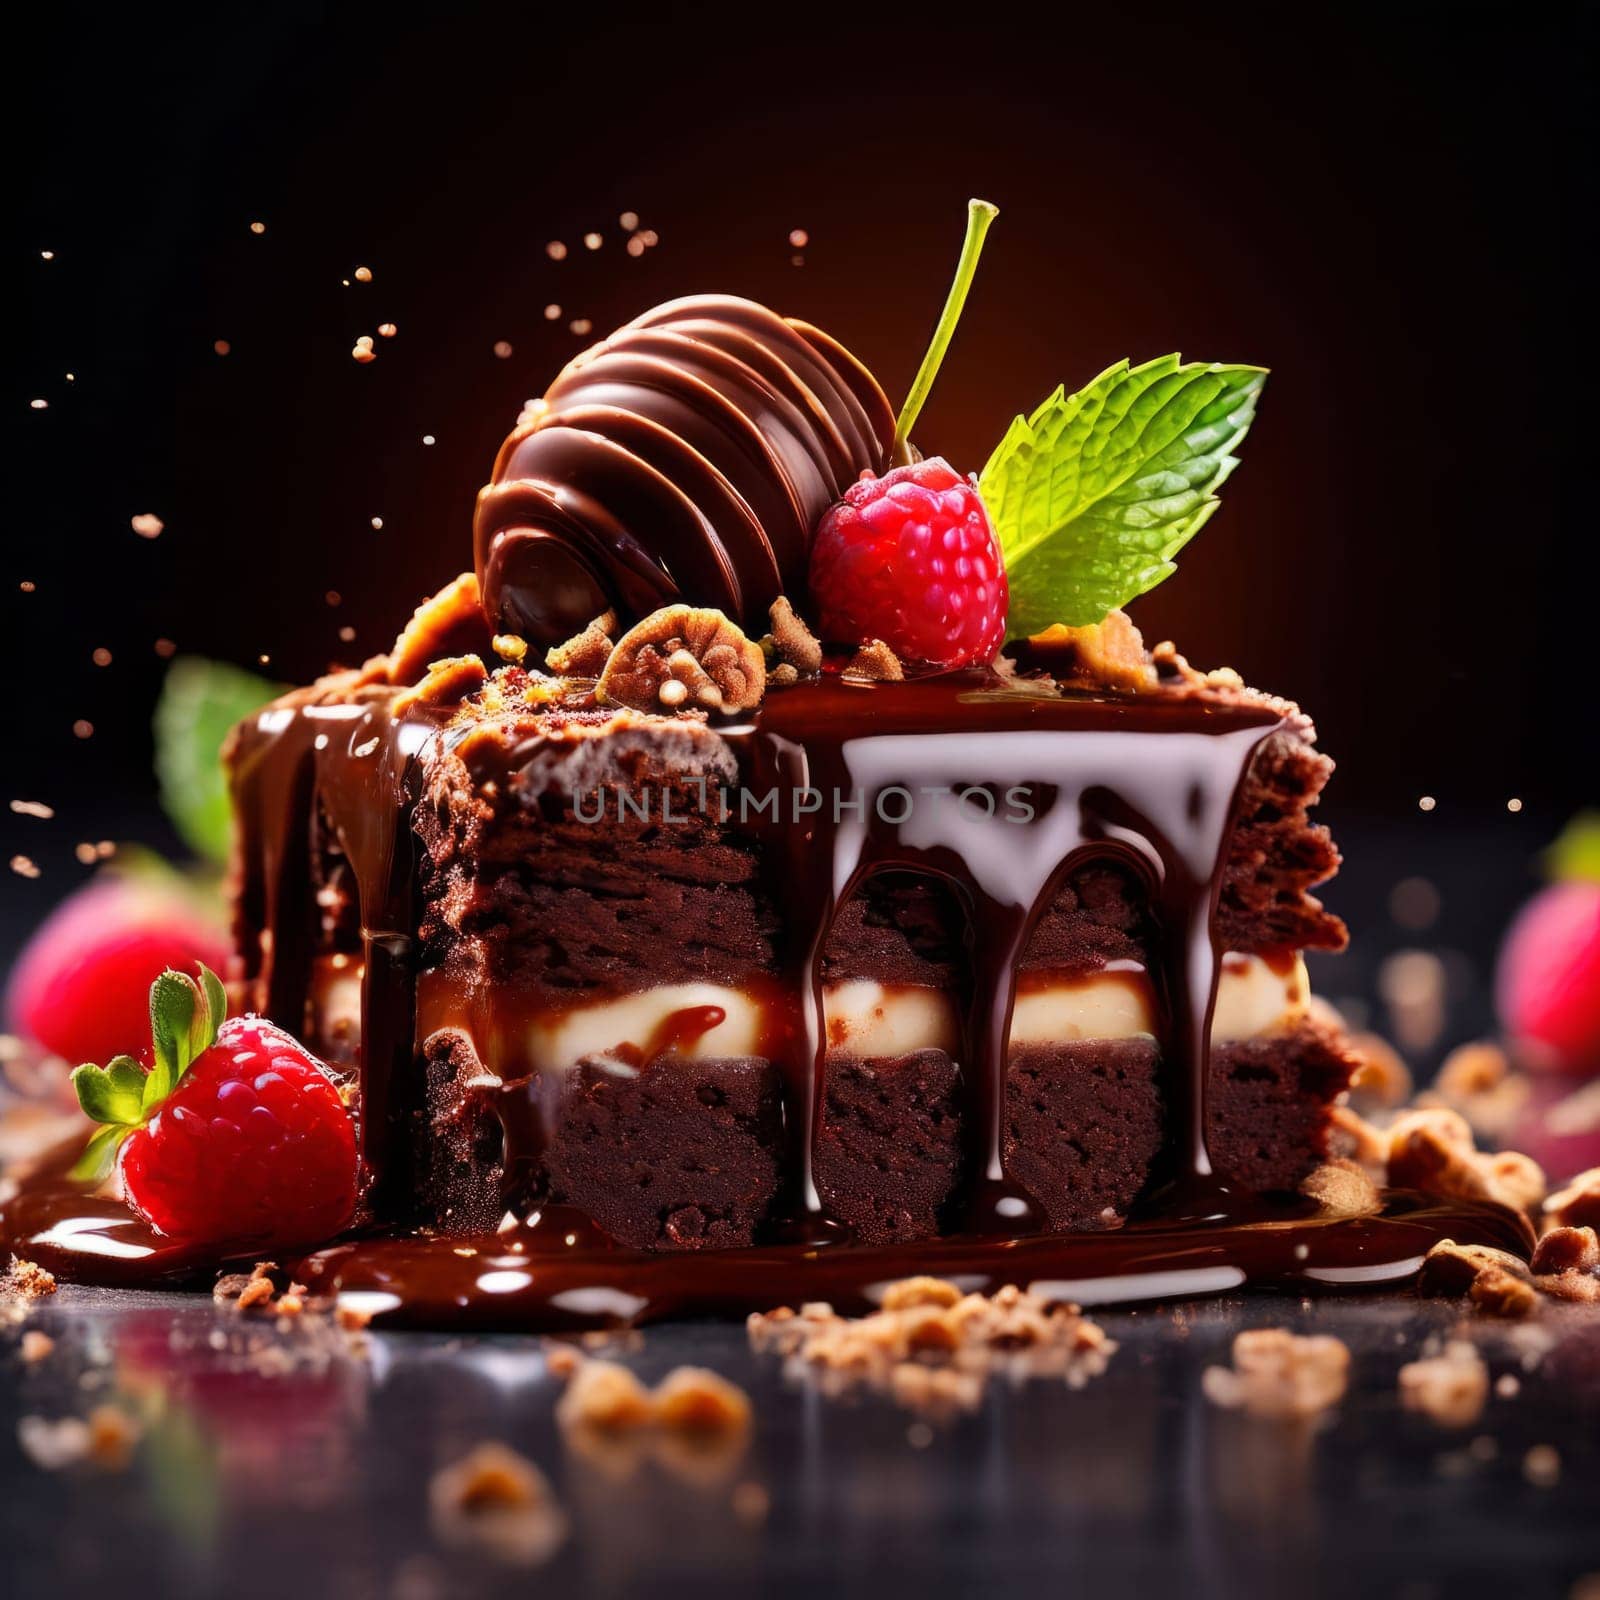 Decadent chocolate cake adorned with fresh berries, drizzled with rich chocolate sauce. For advertising bakery products, cafe, restaurant menus, culinary books, food blogs, website of pastry shop. by Angelsmoon